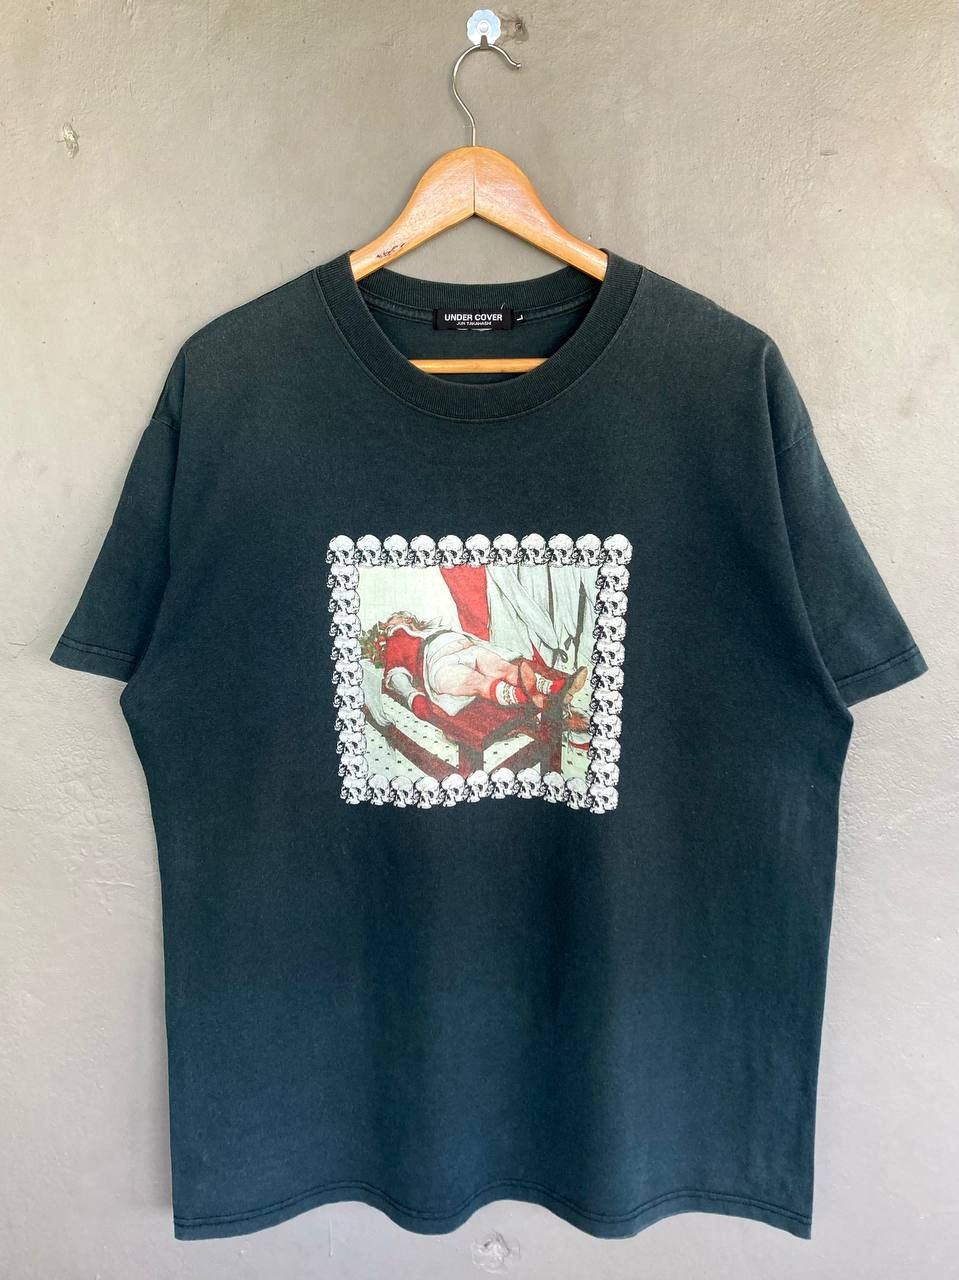 Vintage Undercover “The Last Days of Santa Claus” Tee - 1